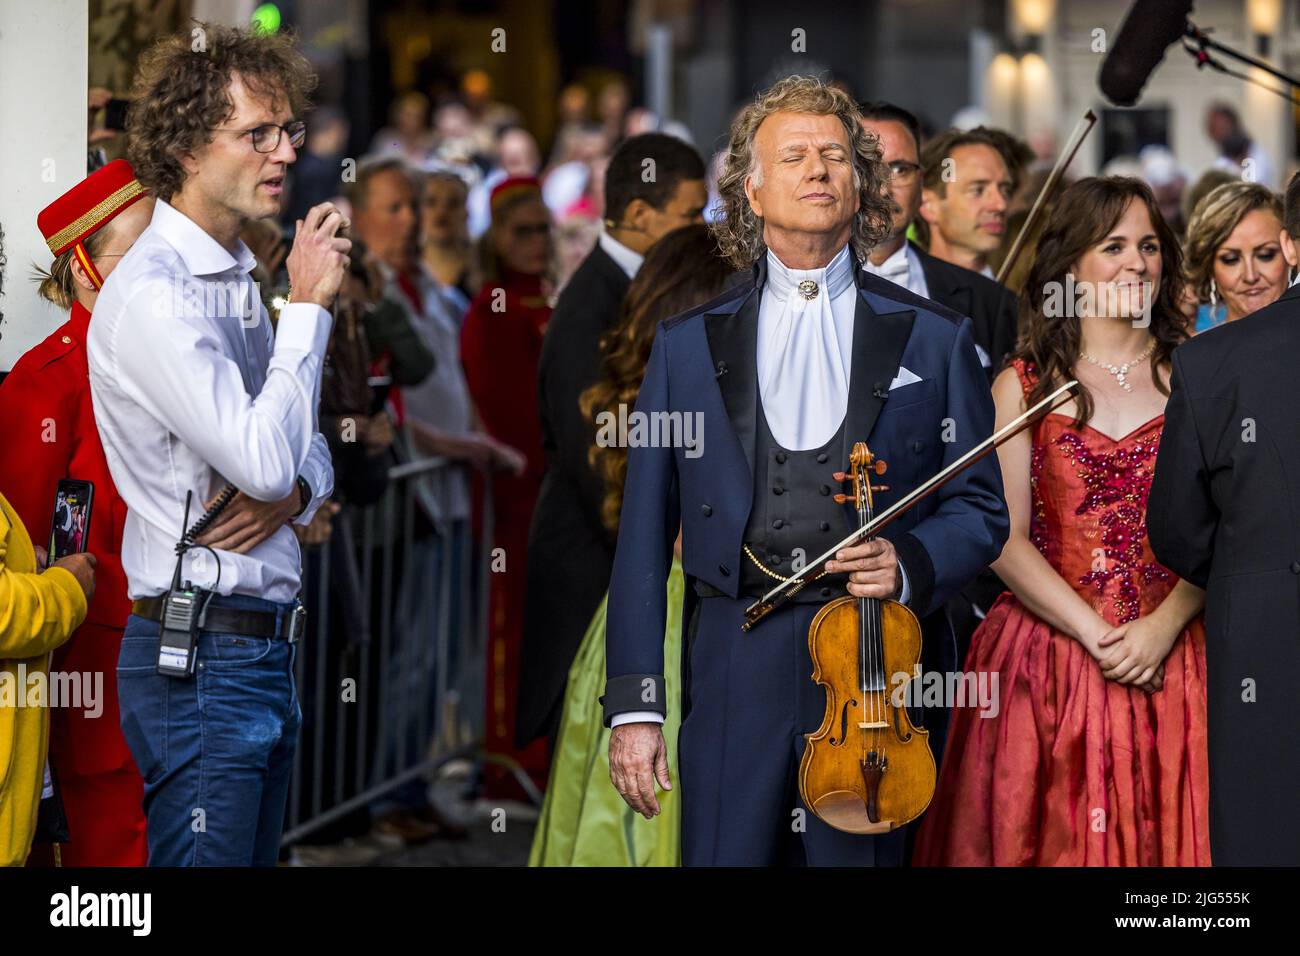 2022-07-07 20:56:23 MAASTRICHT - Violinist Andre Rieu, with his son Pierre on the left, during a concert at the Vrijthof. It is the start of a whole series of concerts on the Maastricht square. ANP KIPPA MARCEL VAN HOORN netherlands out - belgium out Stock Photo